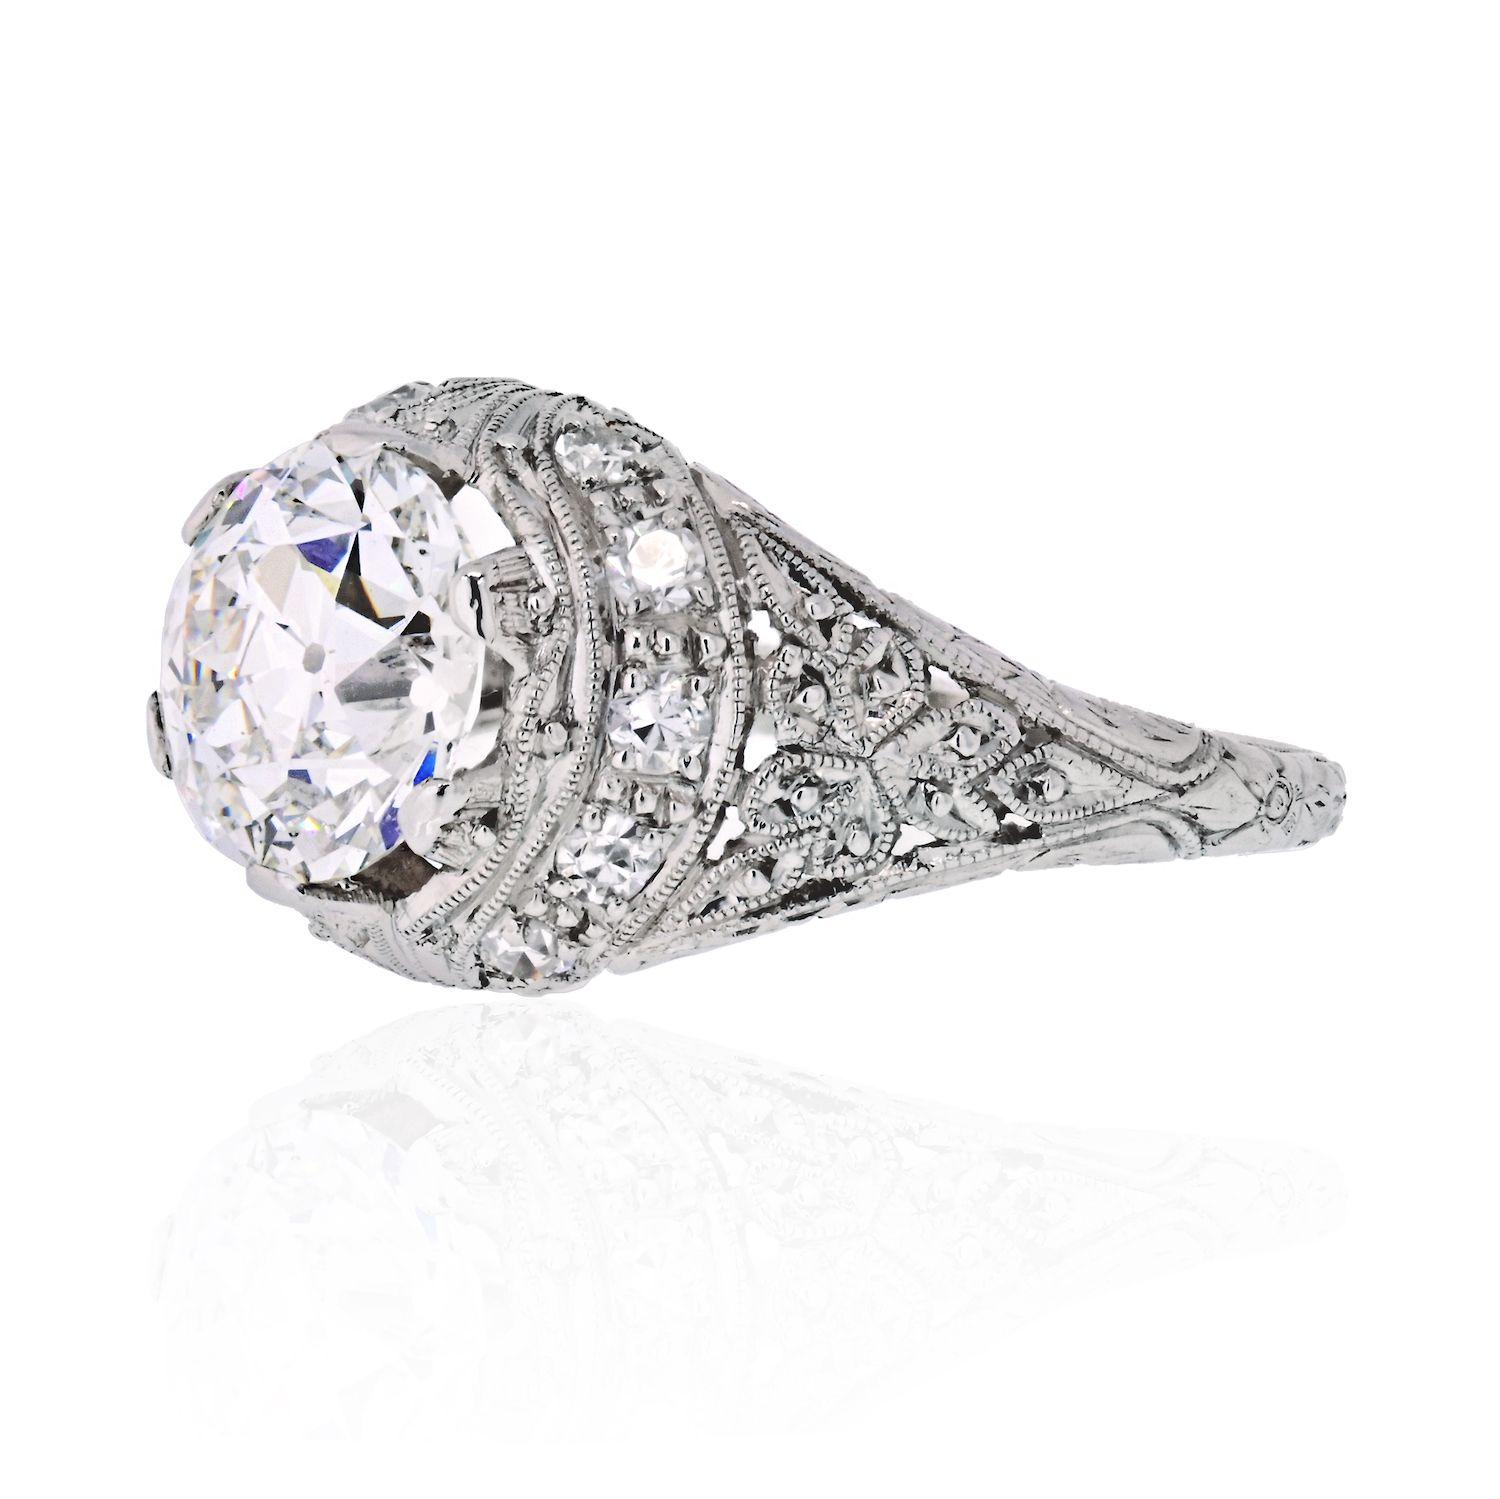 Our vintage, modern and custom rings are truly one of a kind and have been hand curated for their unique and elegant beauty. Take this Art Deco 2.05 carat Old European Cut Diamond ring for example. The primary stone is prong set in dome like